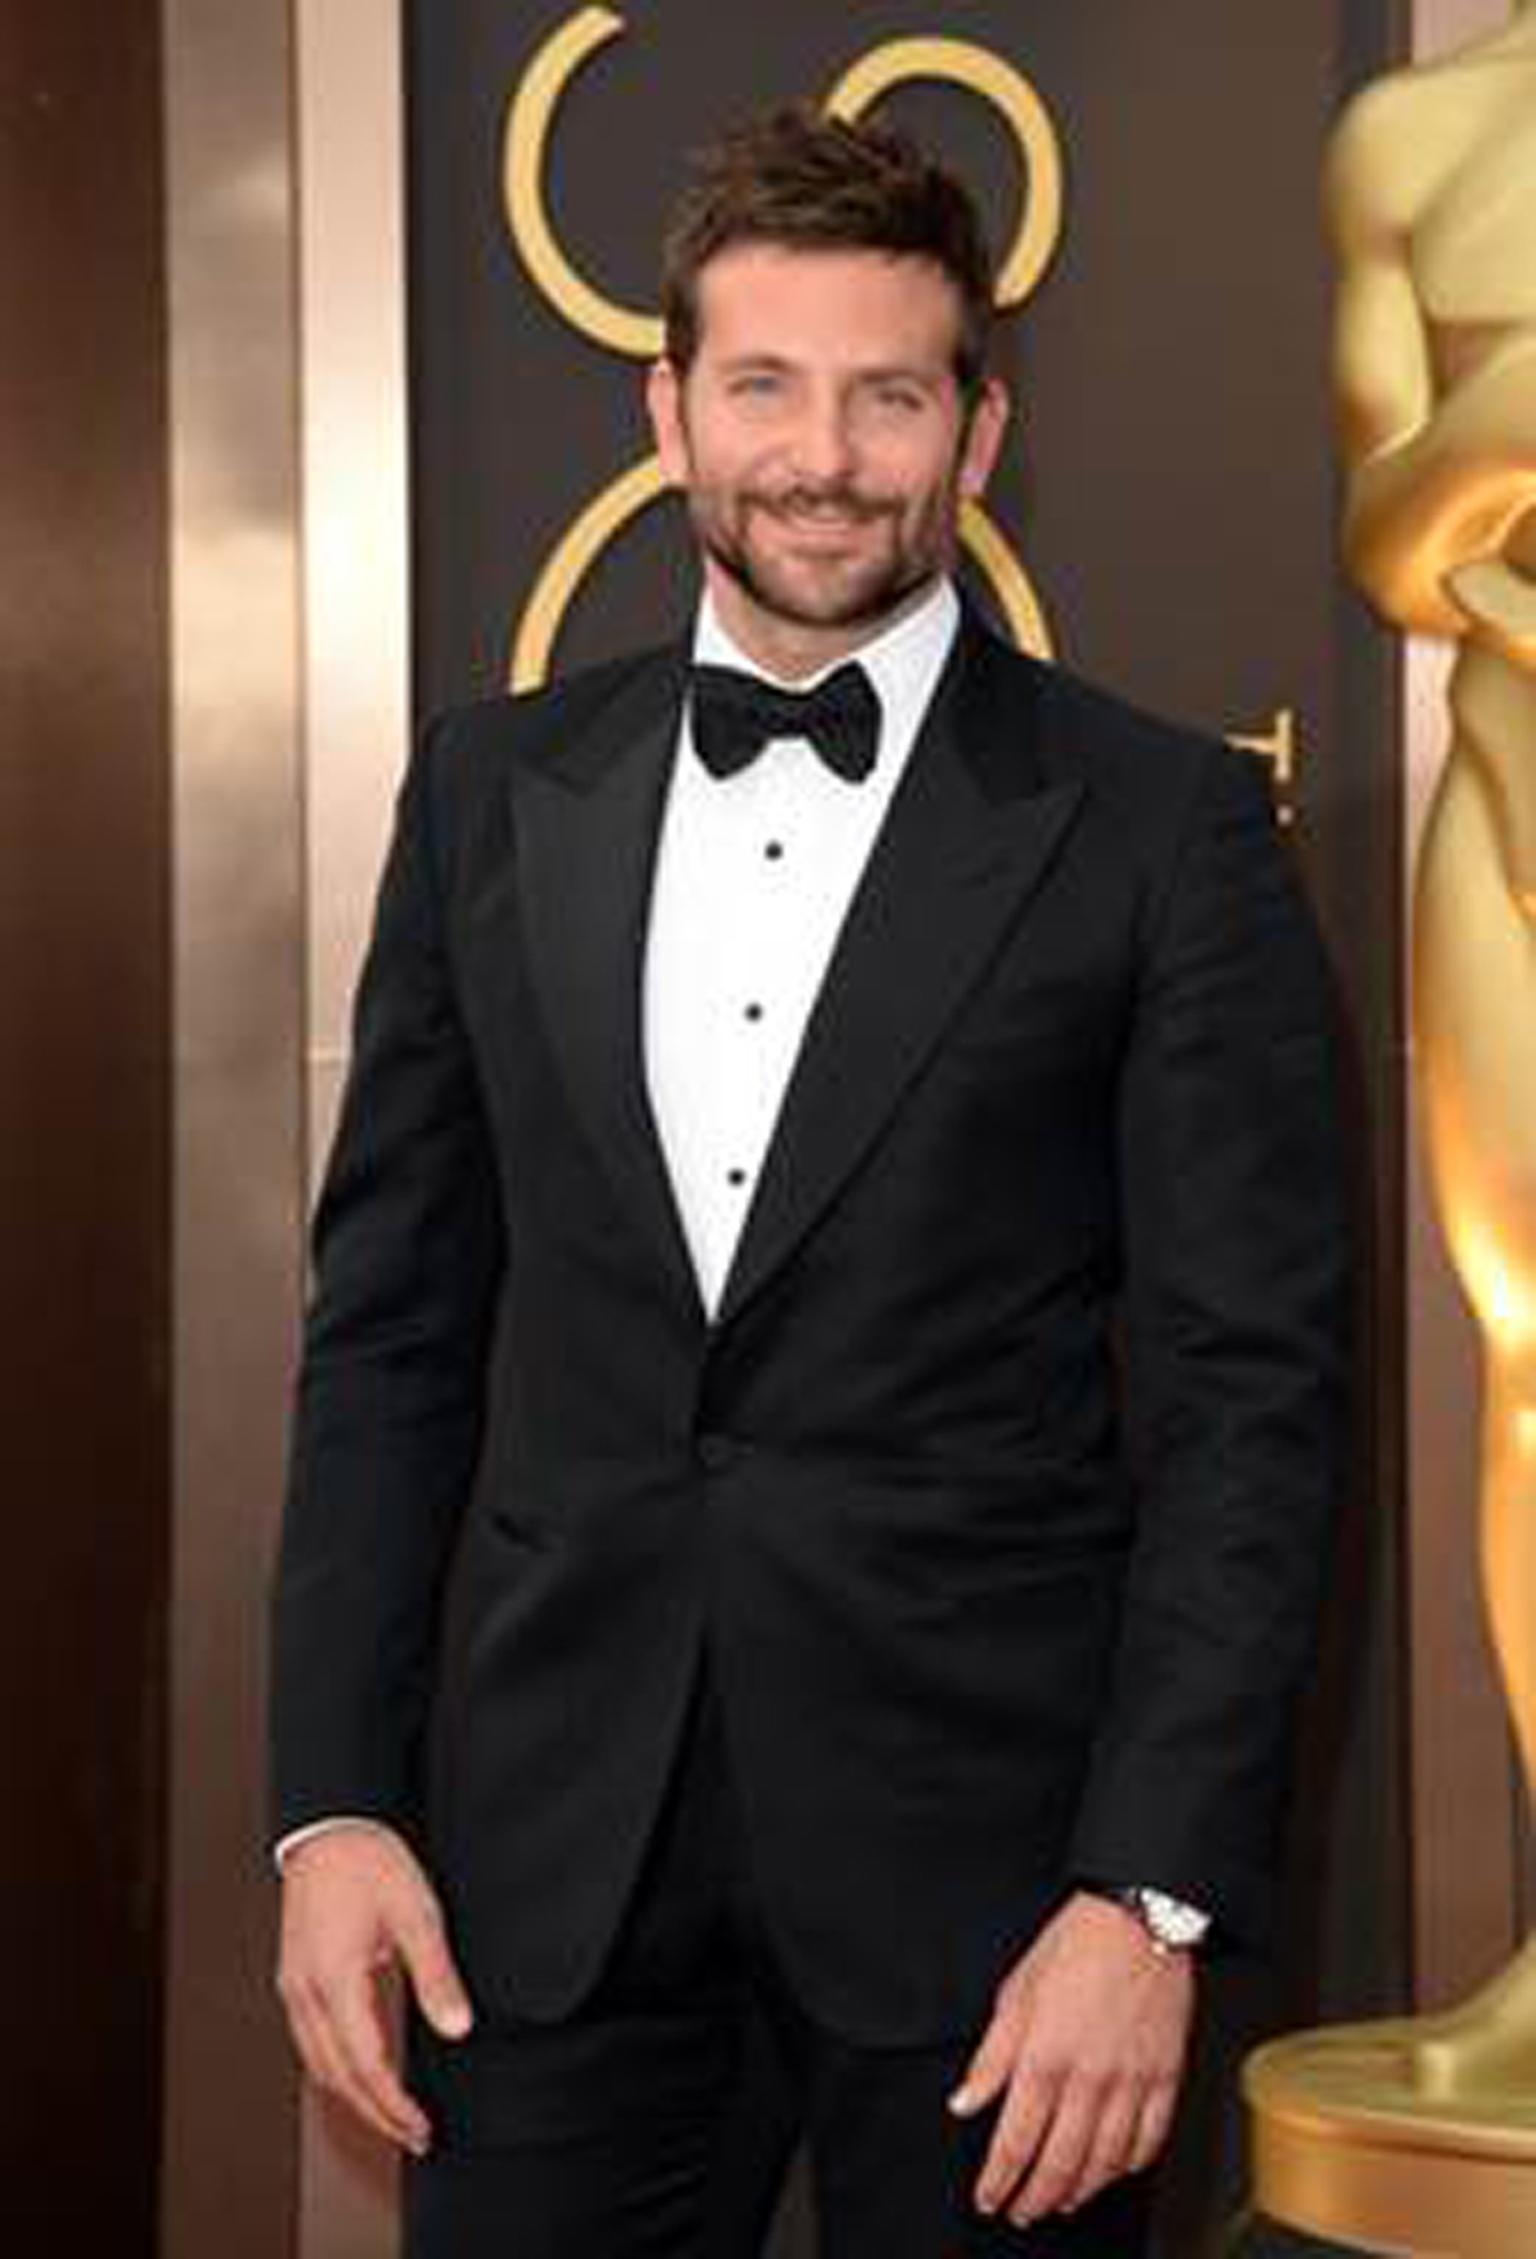 Nominated for Best Actor in a Supporting Role, Bradley Cooper selected Chopard’s L.U.C 1937 stainless steel Classic timepiece featuring a white dial and black alligator strap.